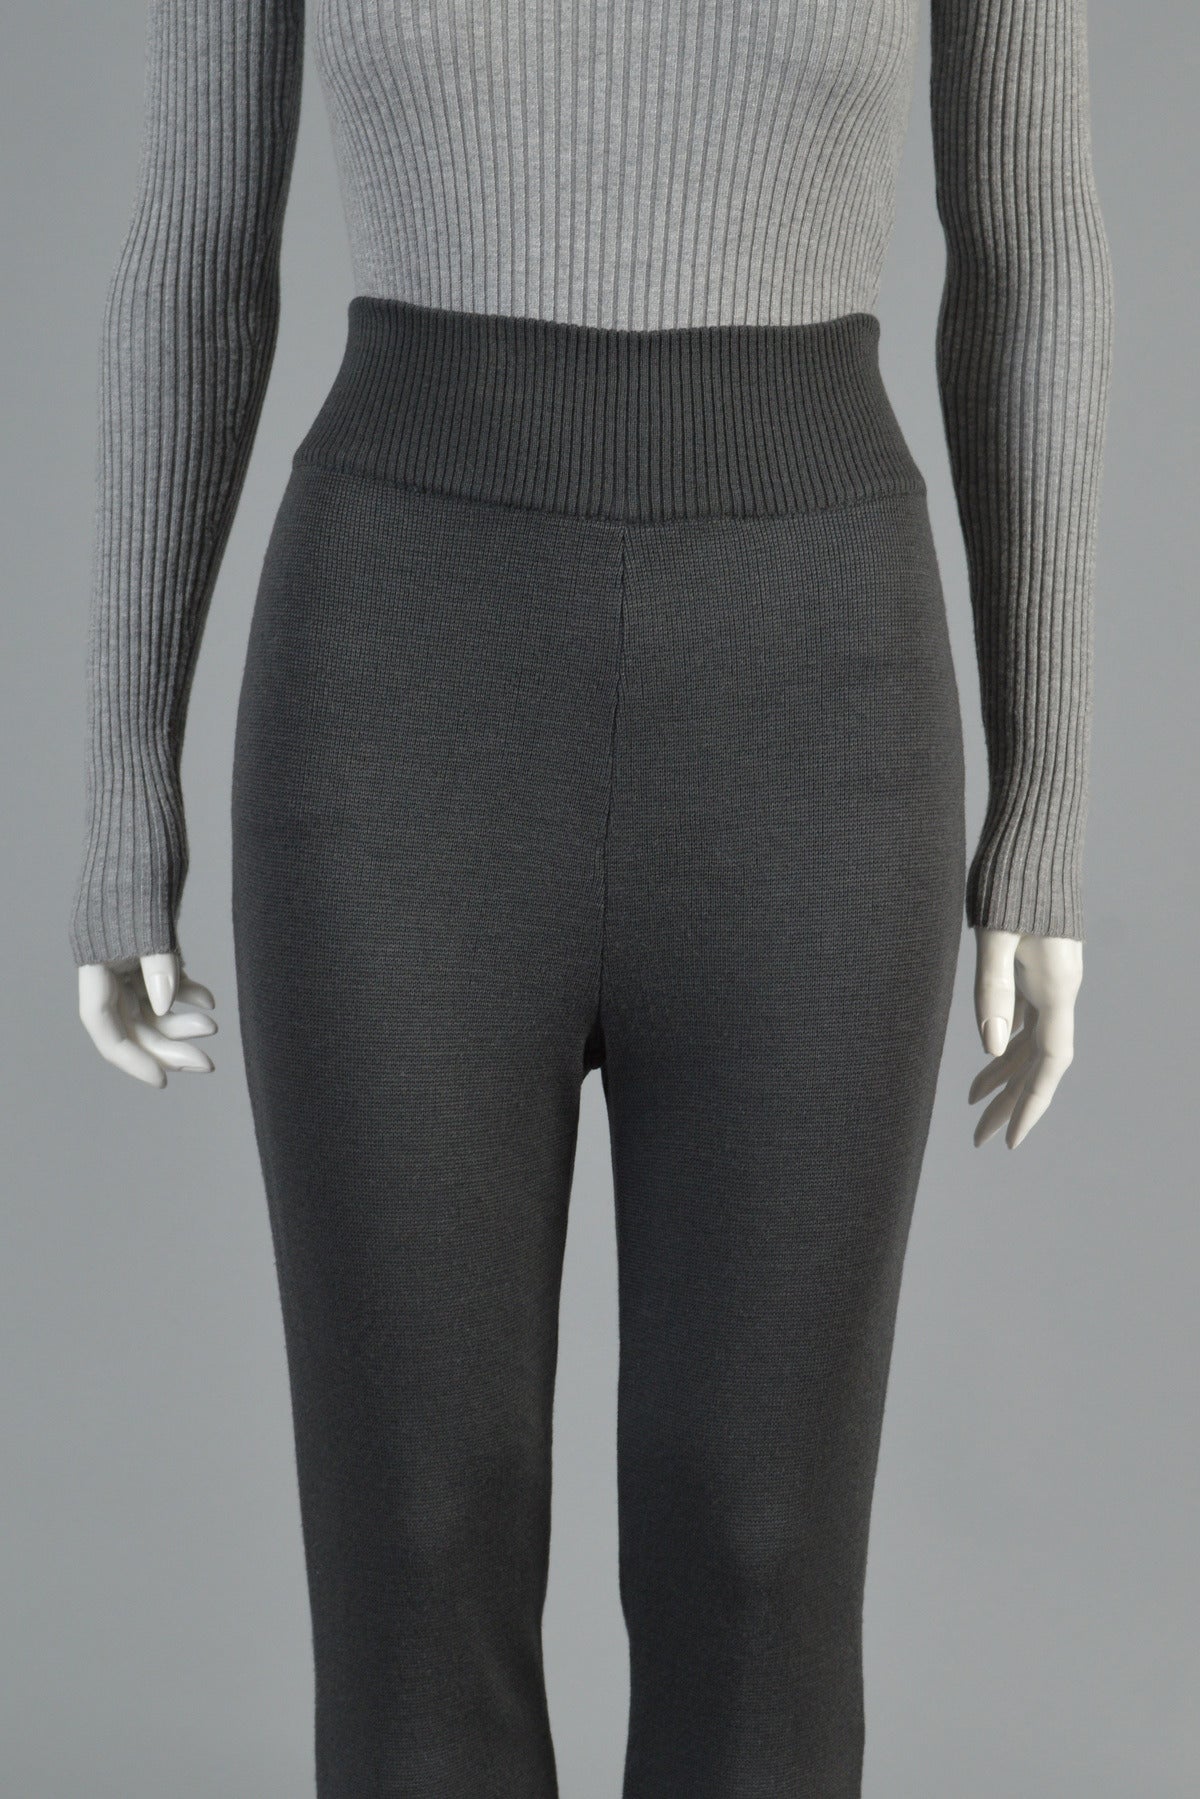 Black Claude Montana High Waisted Knit Wool Legging Pants For Sale